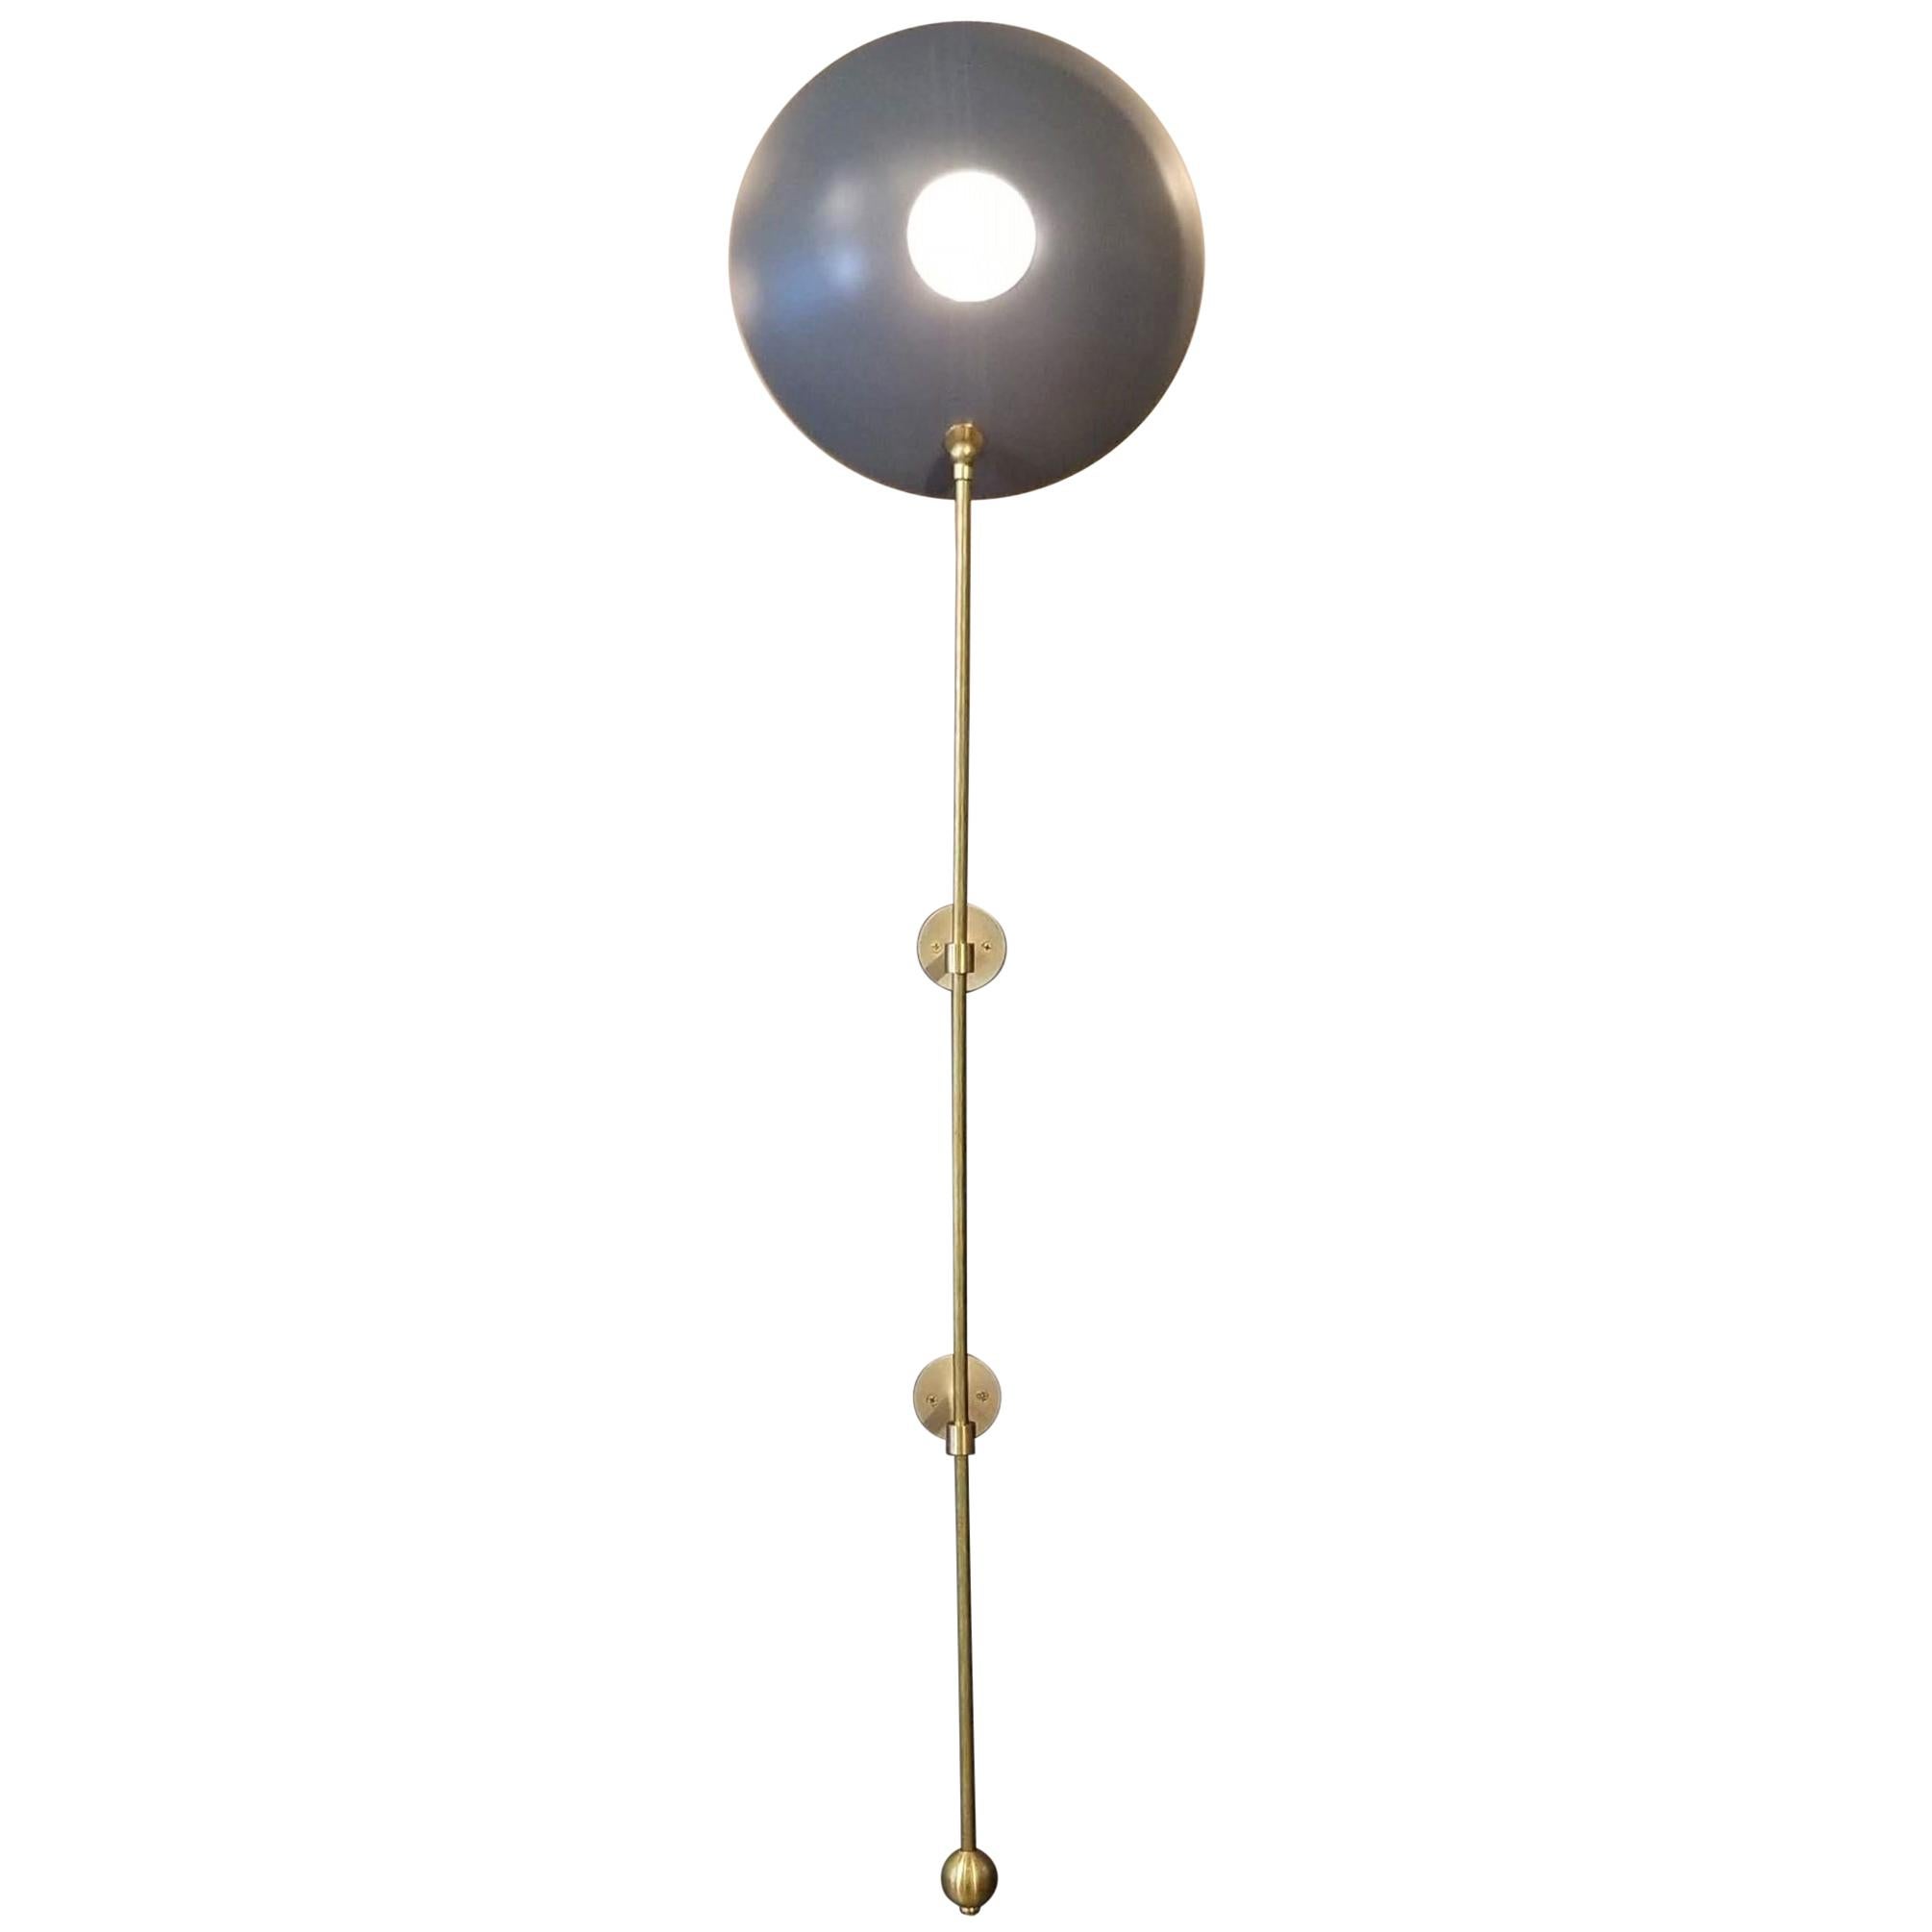 Large "POP" Wall Sconce in Brass and Gray Enamel by Blueprint Lighting